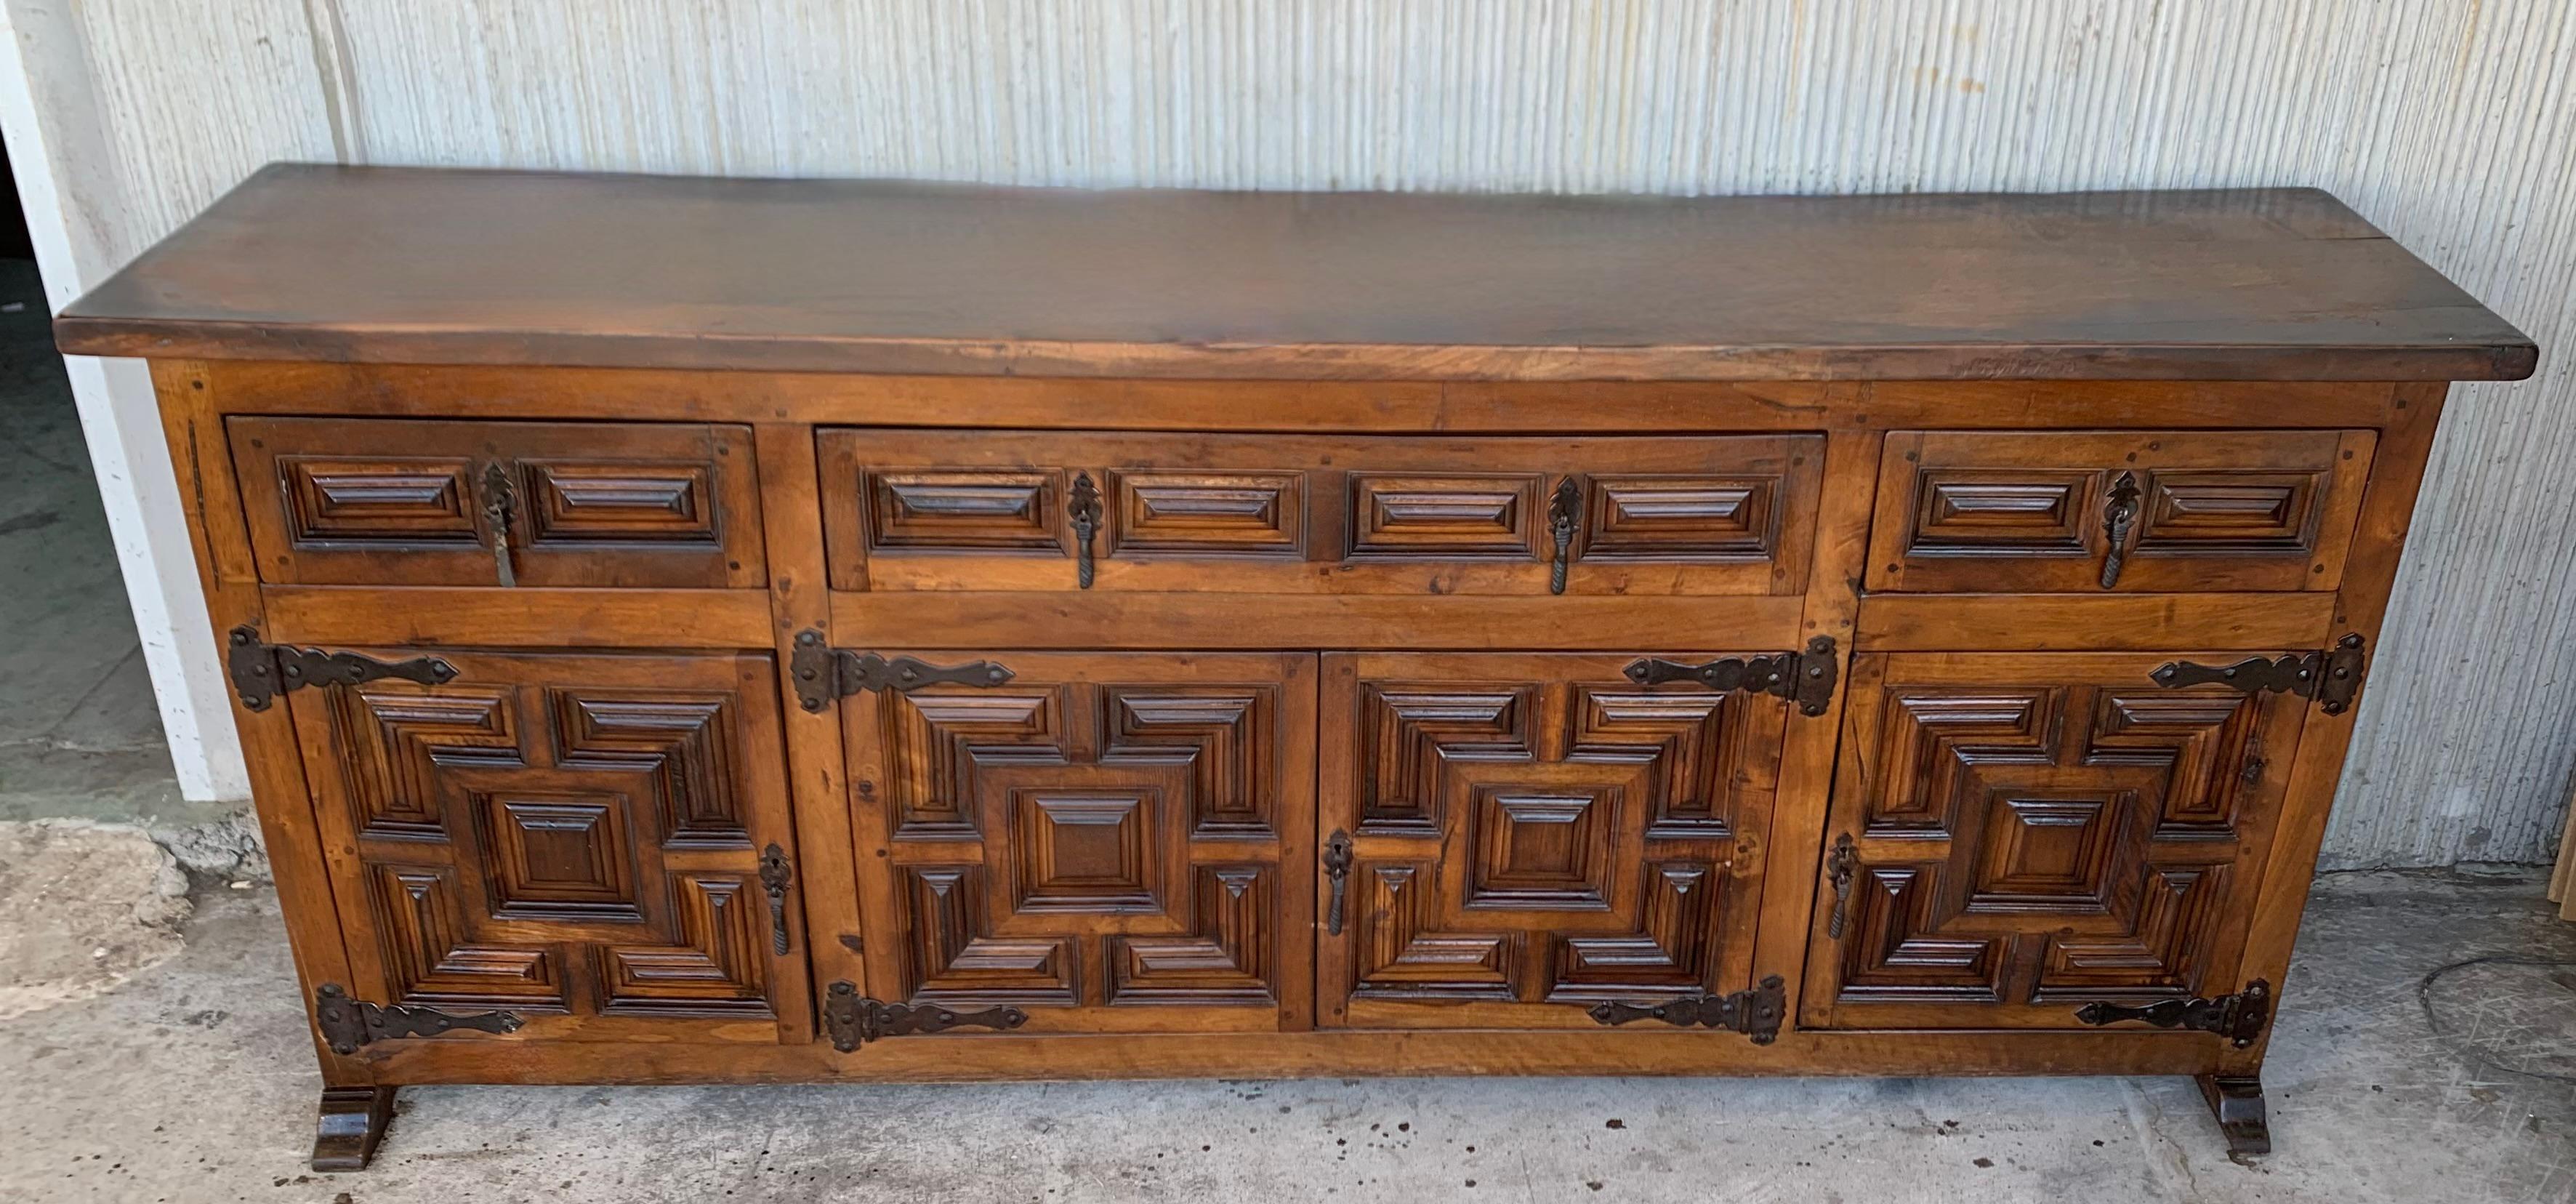 Walnut 19th Century Large Catalan Spanish Baroque Carved Oak Tuscan Credenza or Buffet